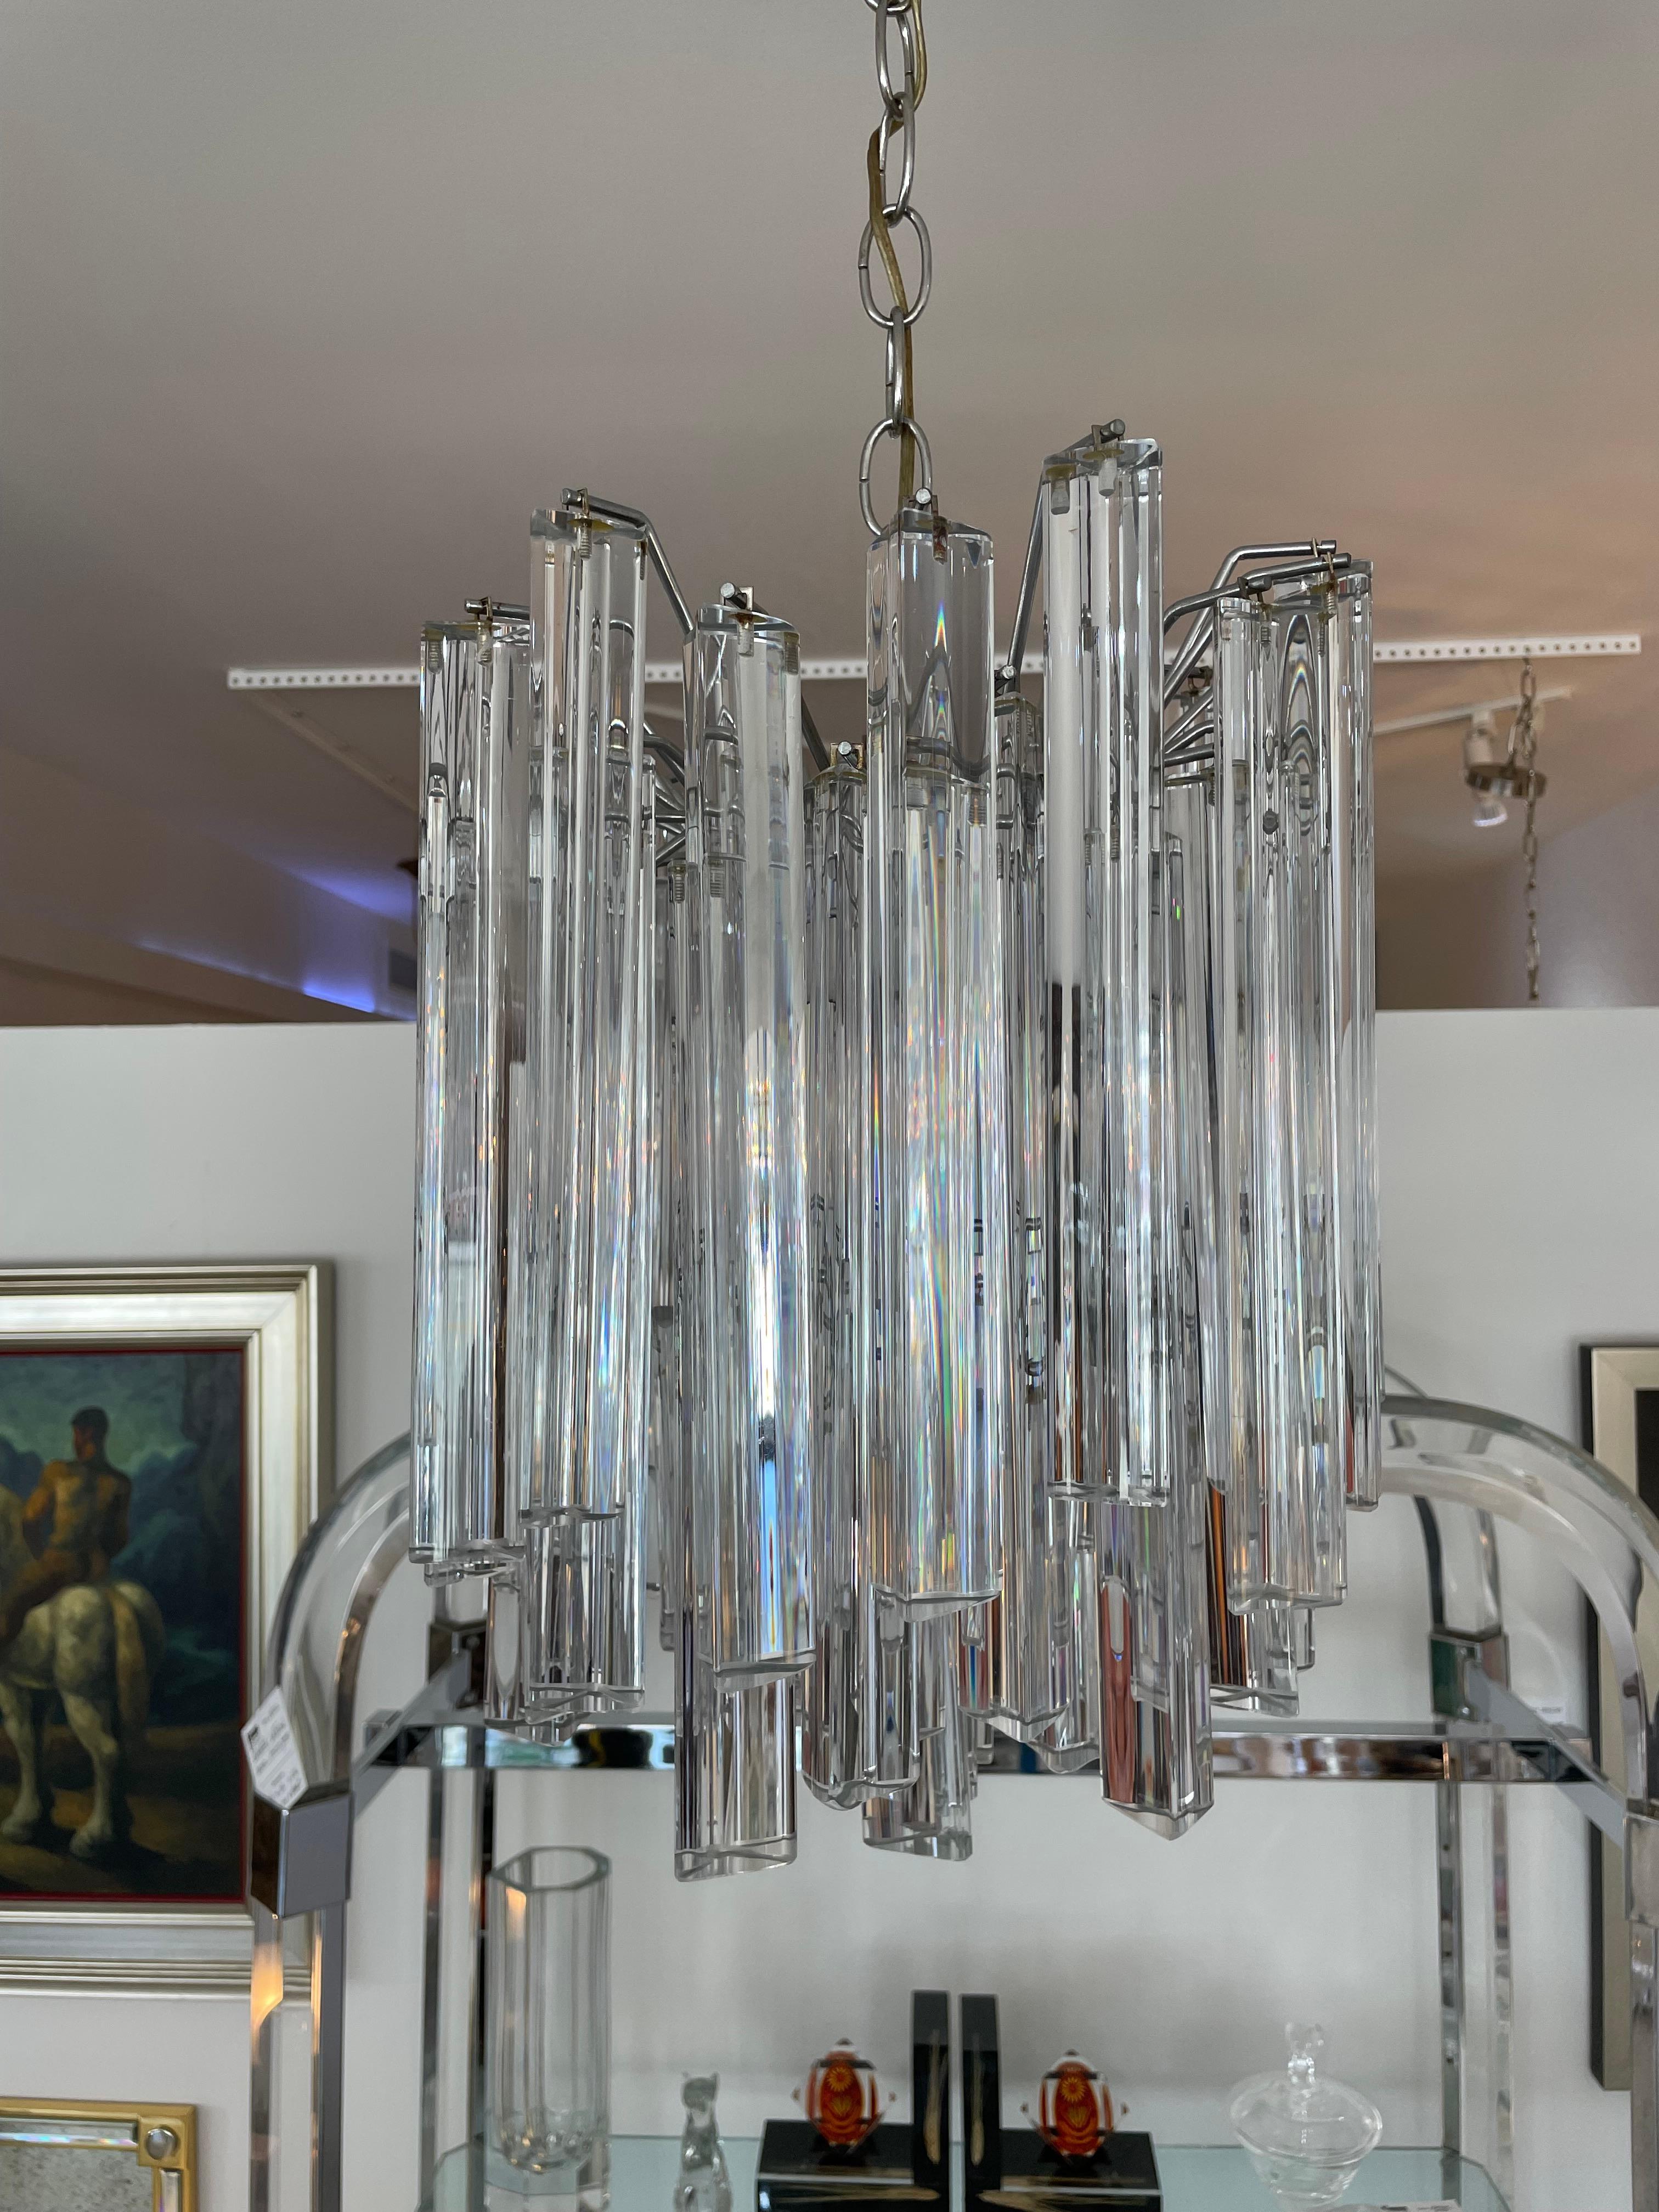 This stylish, chick and classic Camer chandelier dates to the 1960s-1970s, it will make a subtle statement with its form and Venini Murano glass prisms.

Note: Top layer prisms measure 11